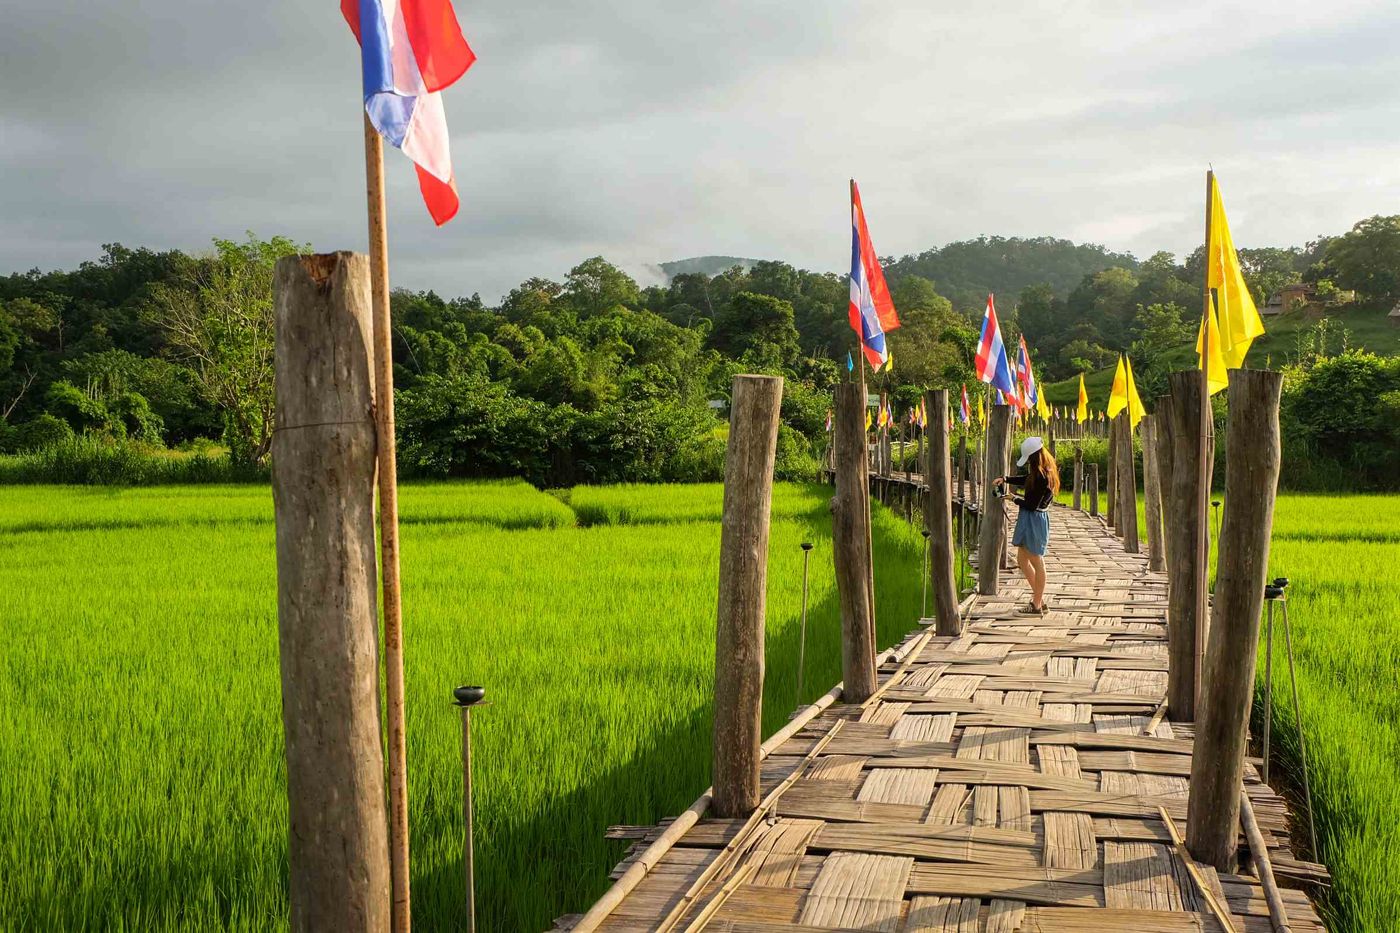 Take a trip to Northern Thailand